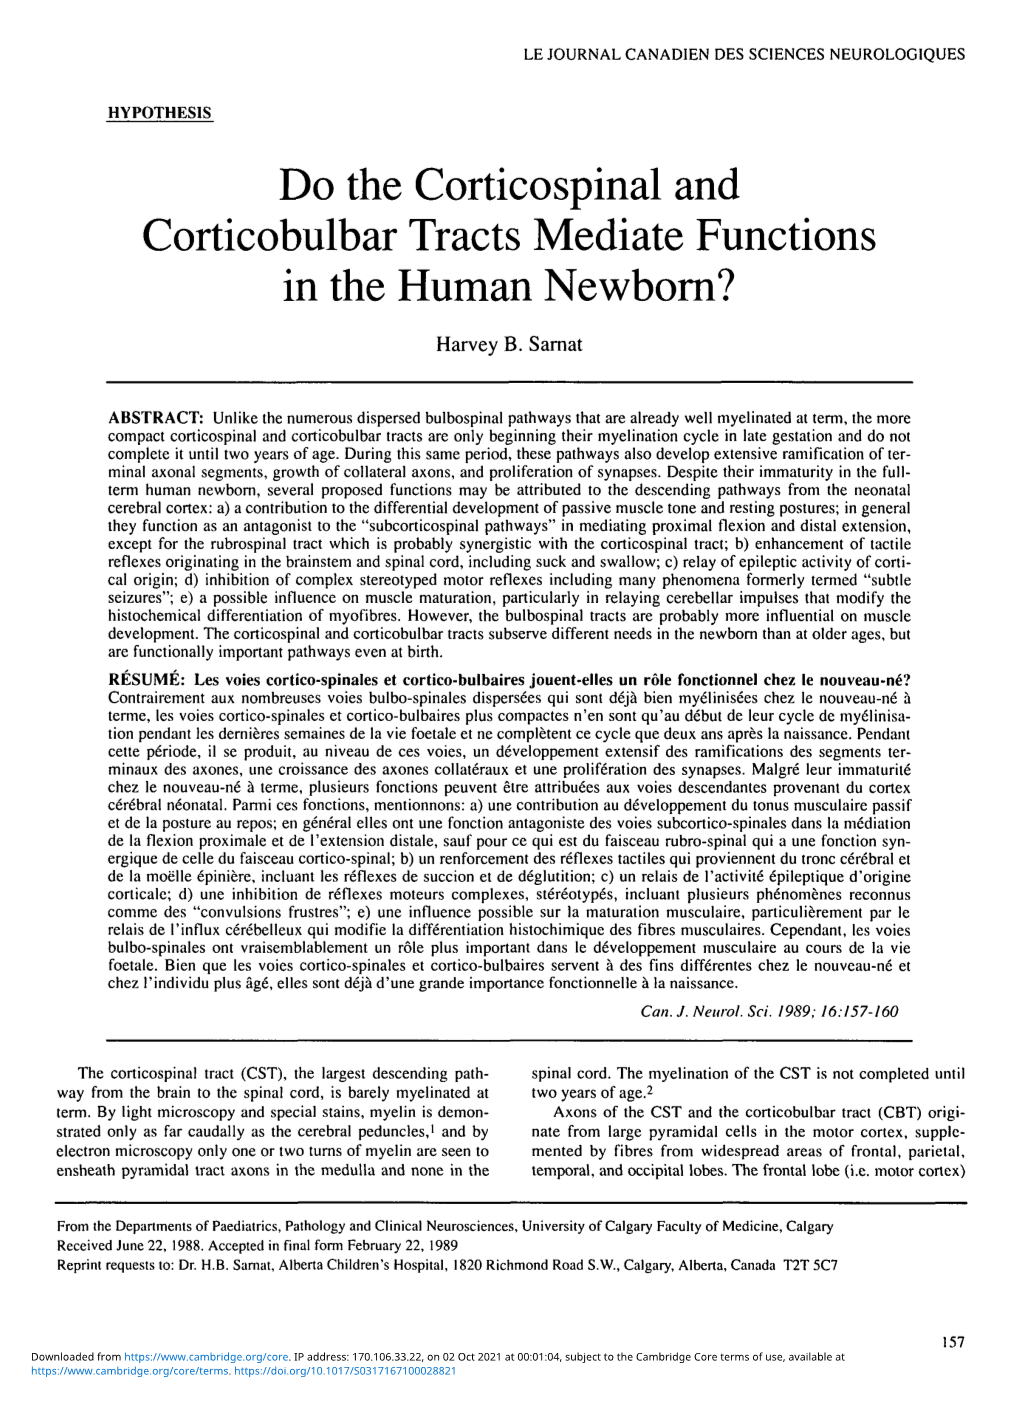 Do the Corticospinal and Corticobulbar Tracts Mediate Functions in the Human Newborn?